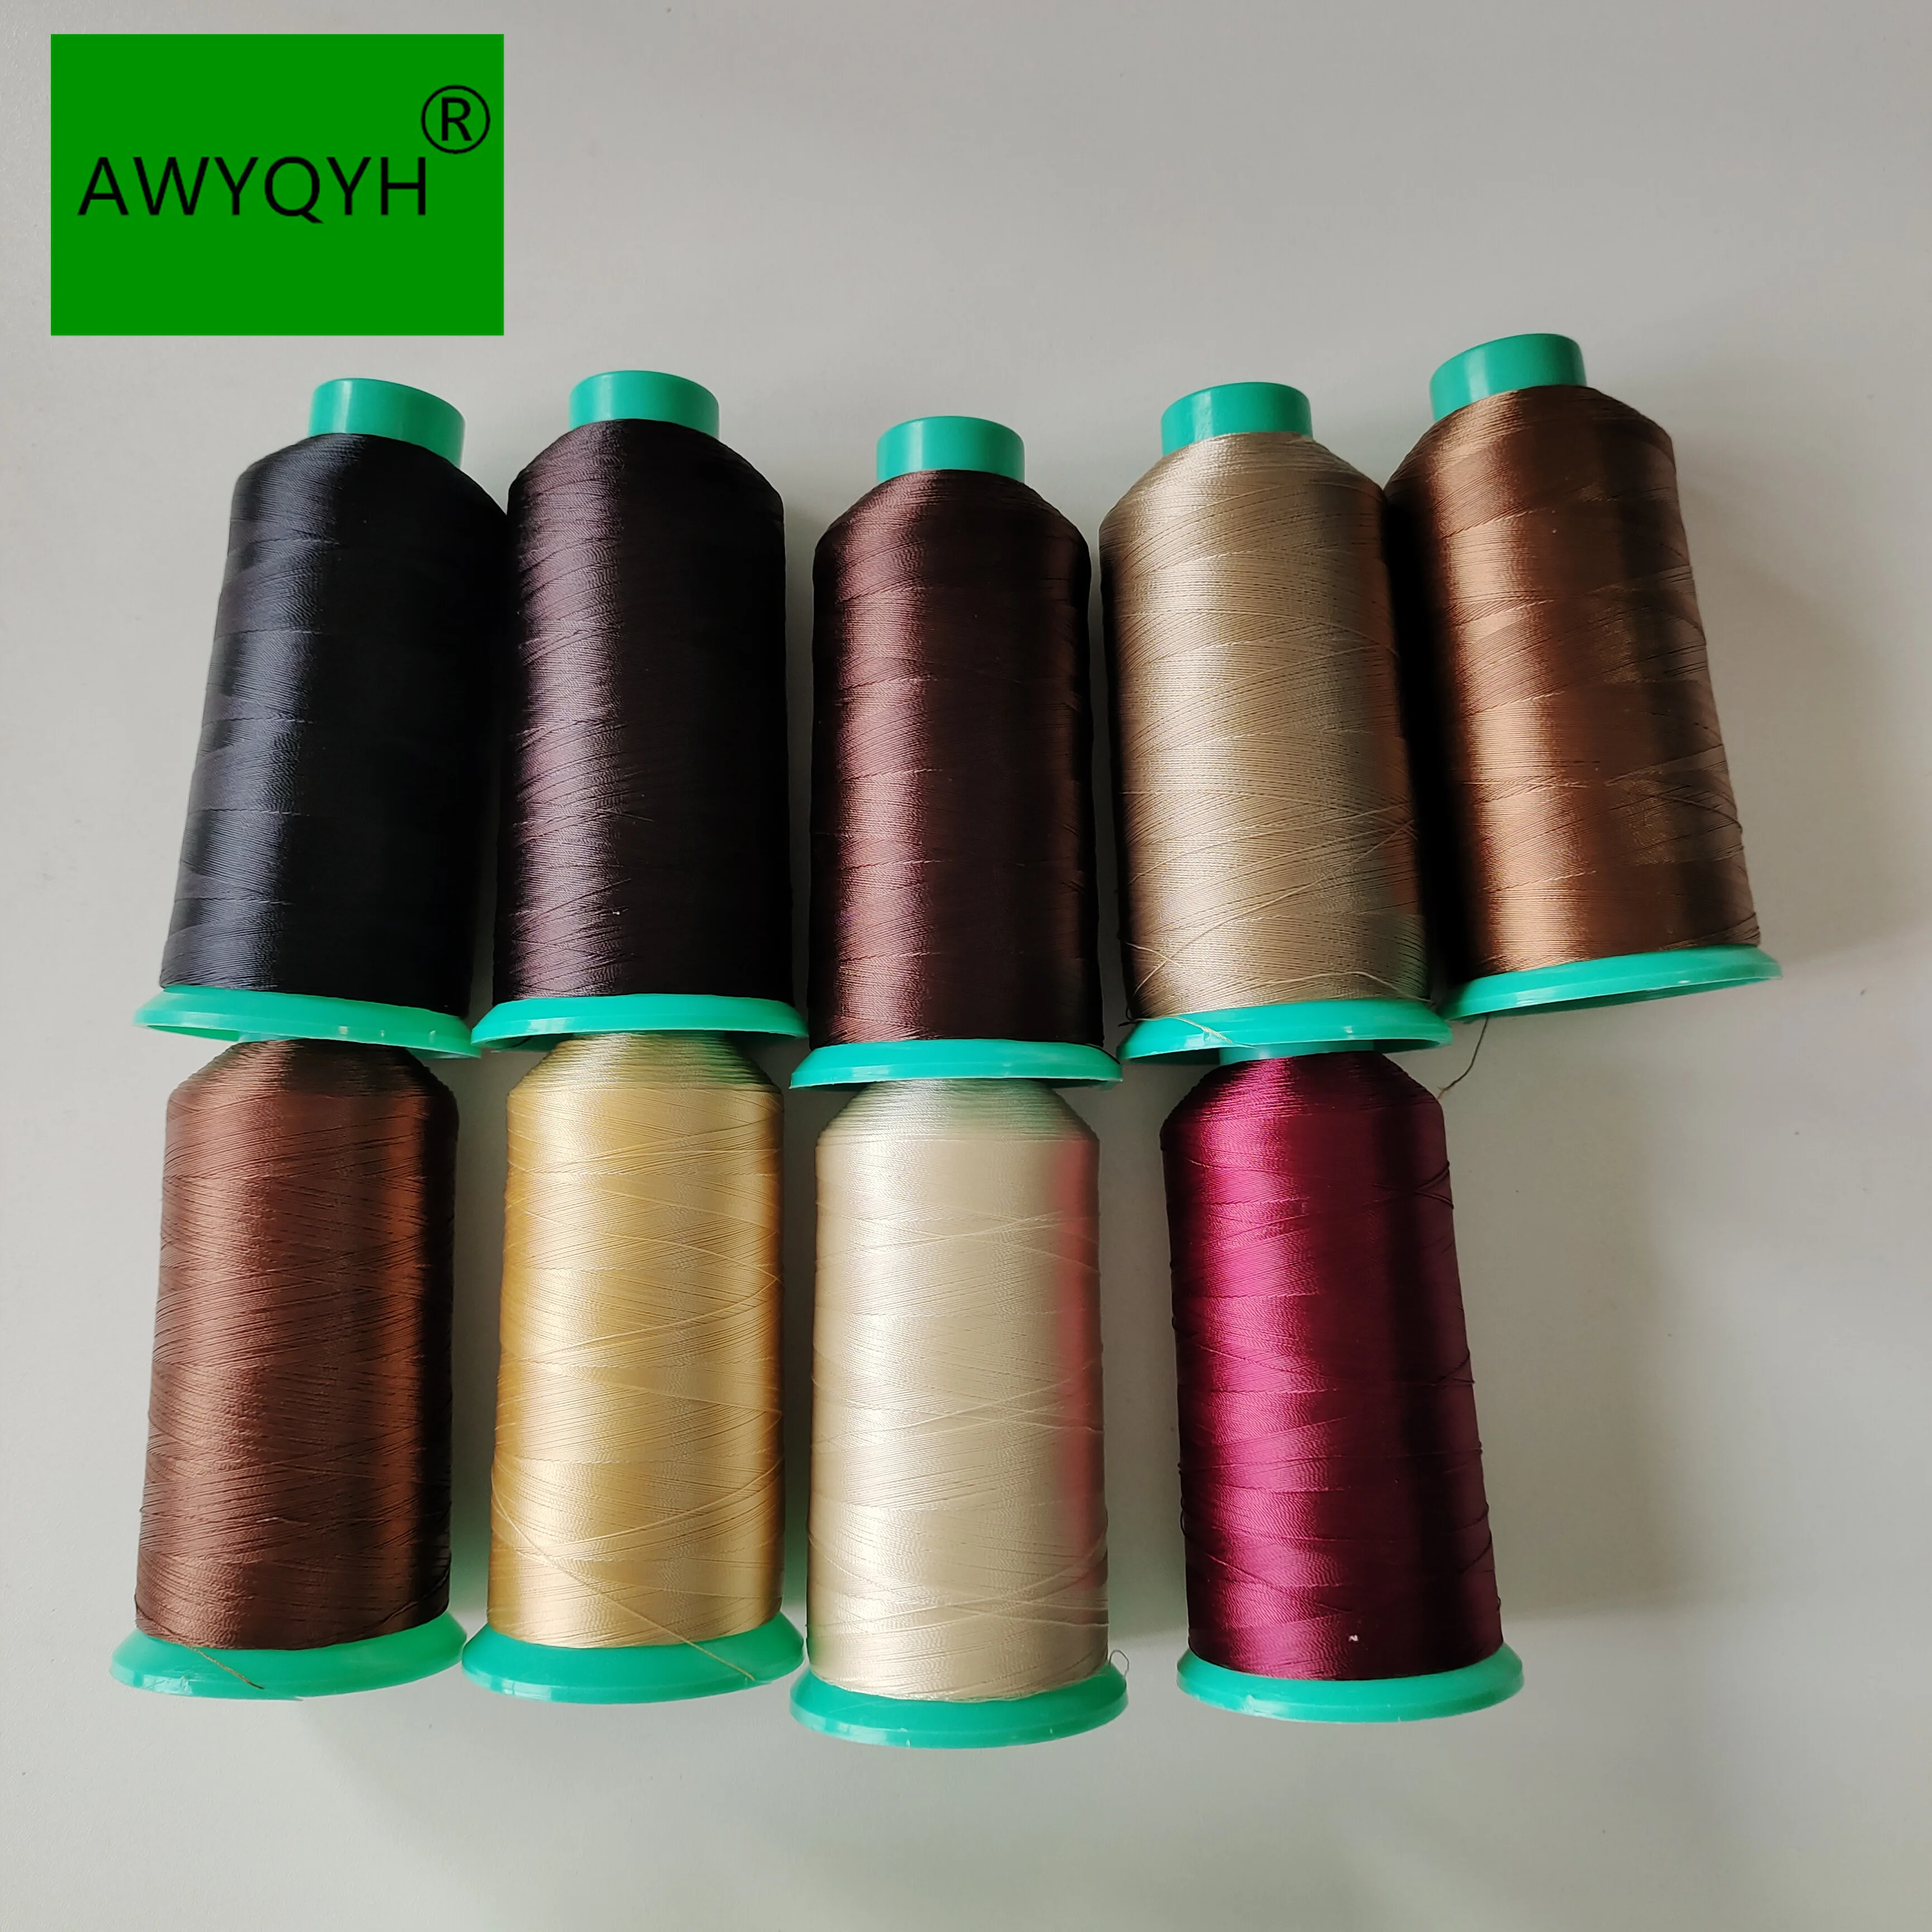 Nylon Bonded Weaving Thread High Strength Nylon Weaving Thread For Sewing  Hair Extensions Wigs